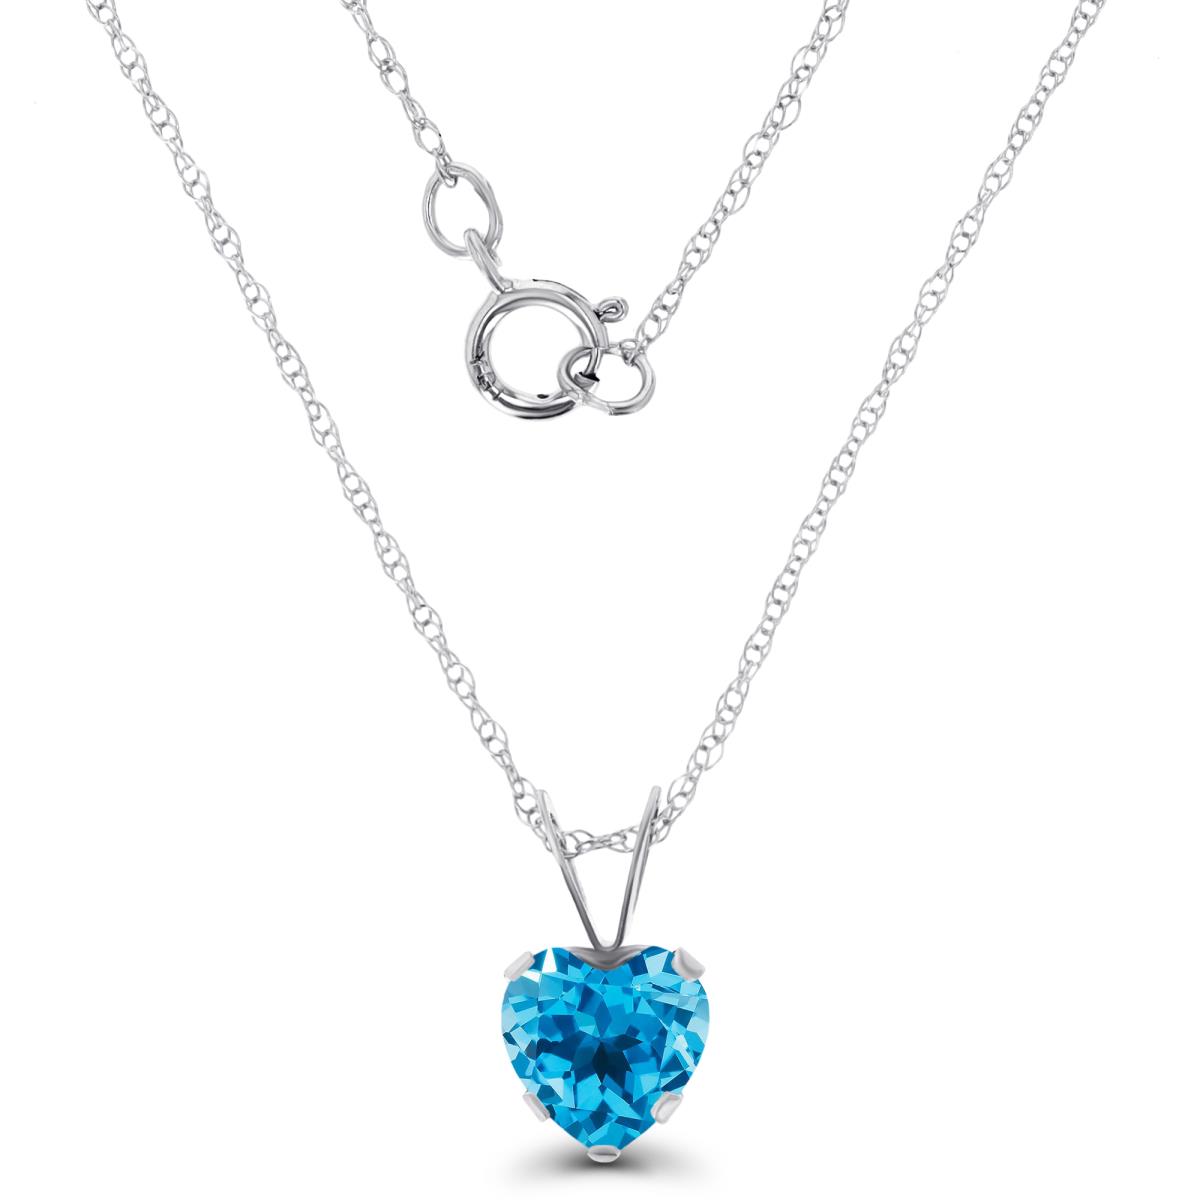 14K White Gold 6x6mm Heart Swiss Blue Topaz 18" Rope Chain Necklace